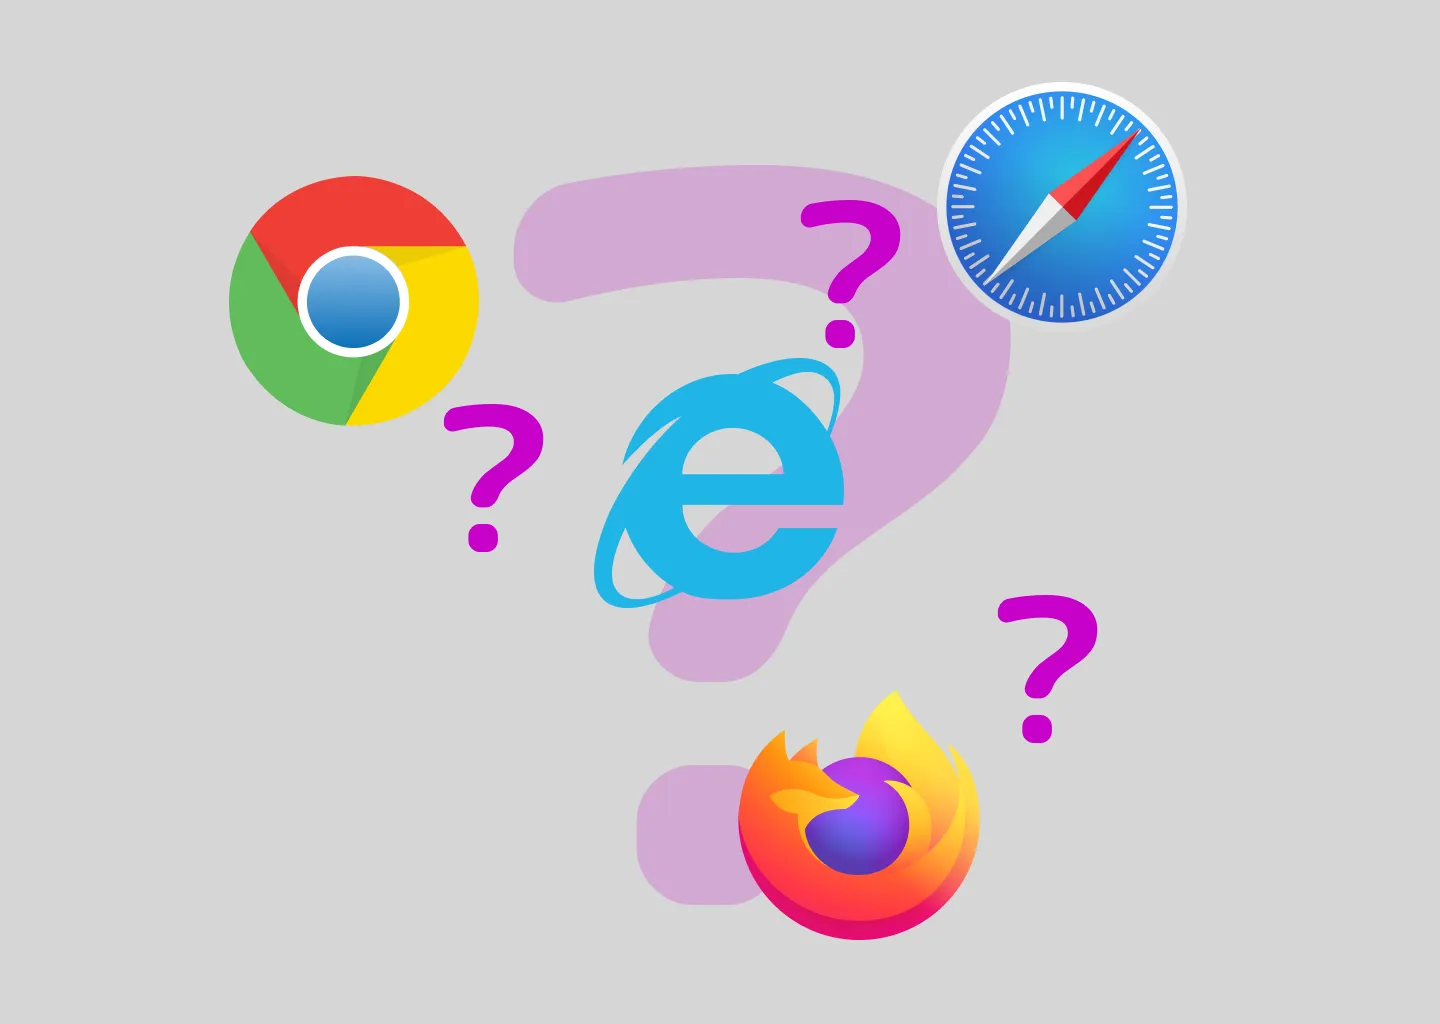 Browser icons and question marks